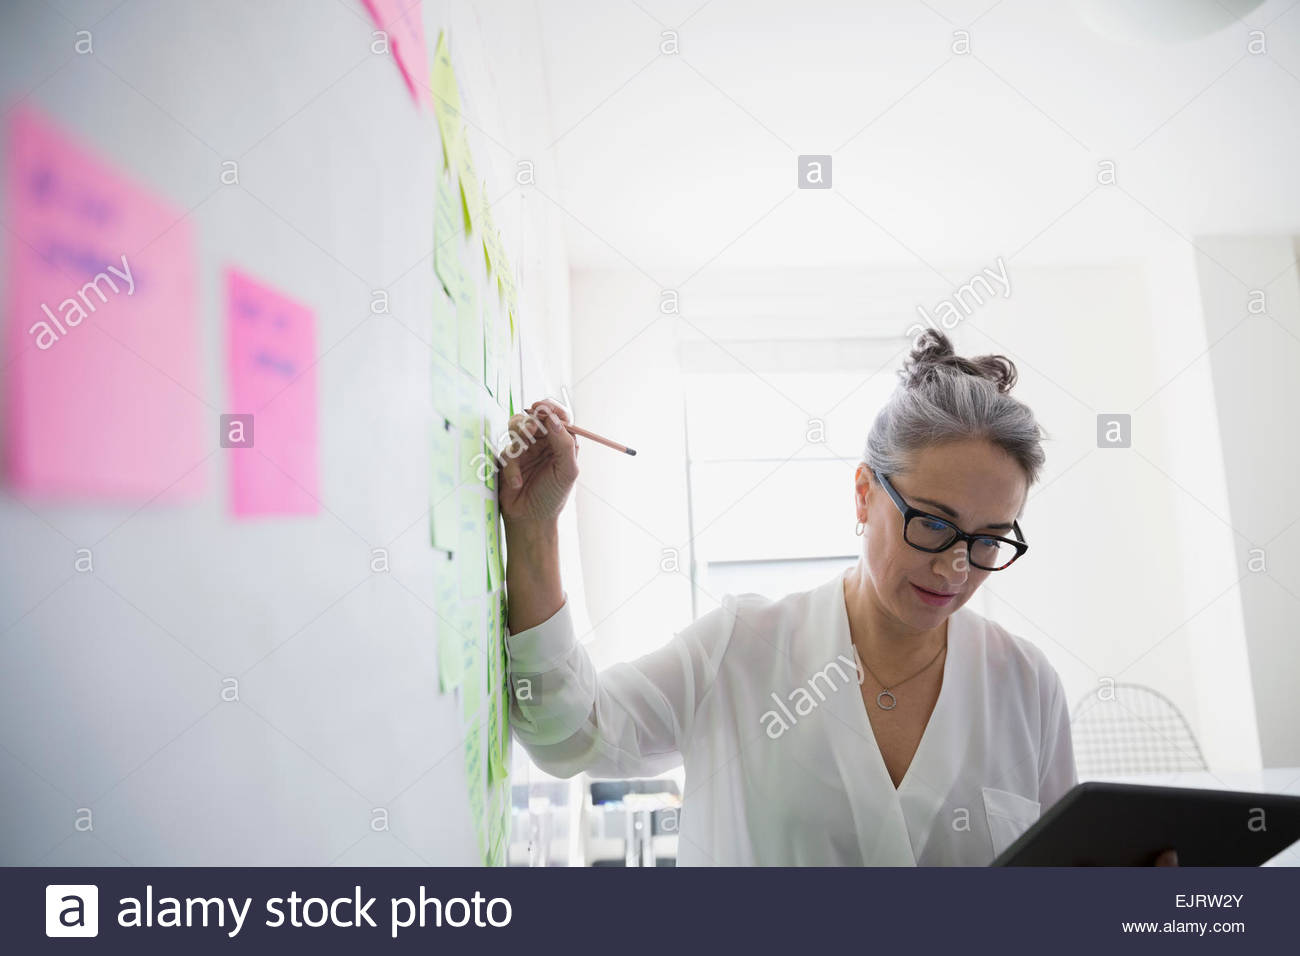 Businesswoman with digital tablet brainstorming Stock Photo